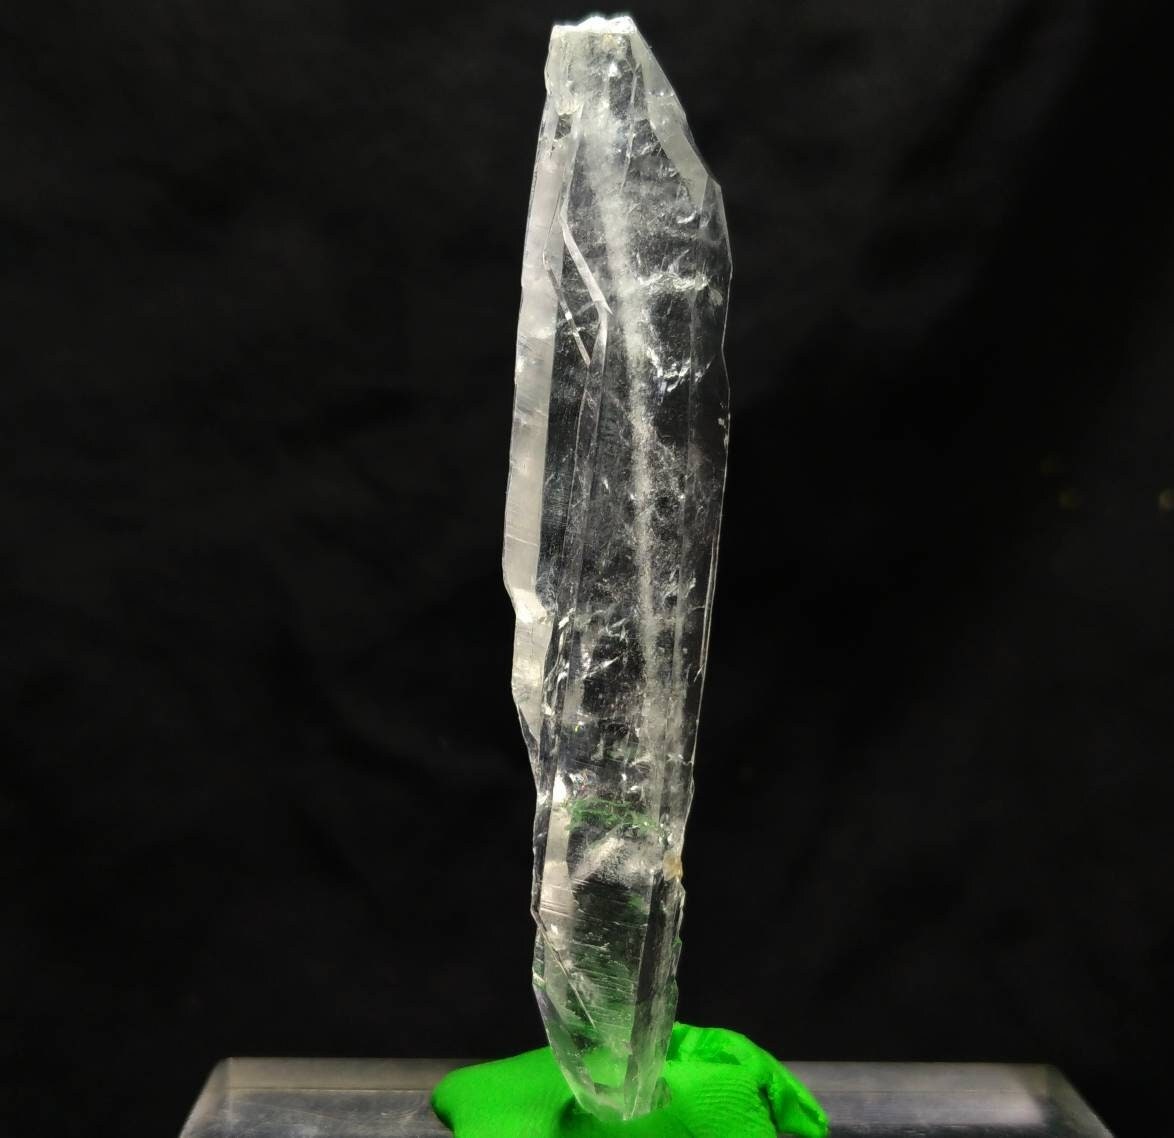 ARSAA GEMS AND MINERALSNatural high quality beautiful 9.5 grams terminated clear faden quartz crystal - Premium  from ARSAA GEMS AND MINERALS - Just $25.00! Shop now at ARSAA GEMS AND MINERALS